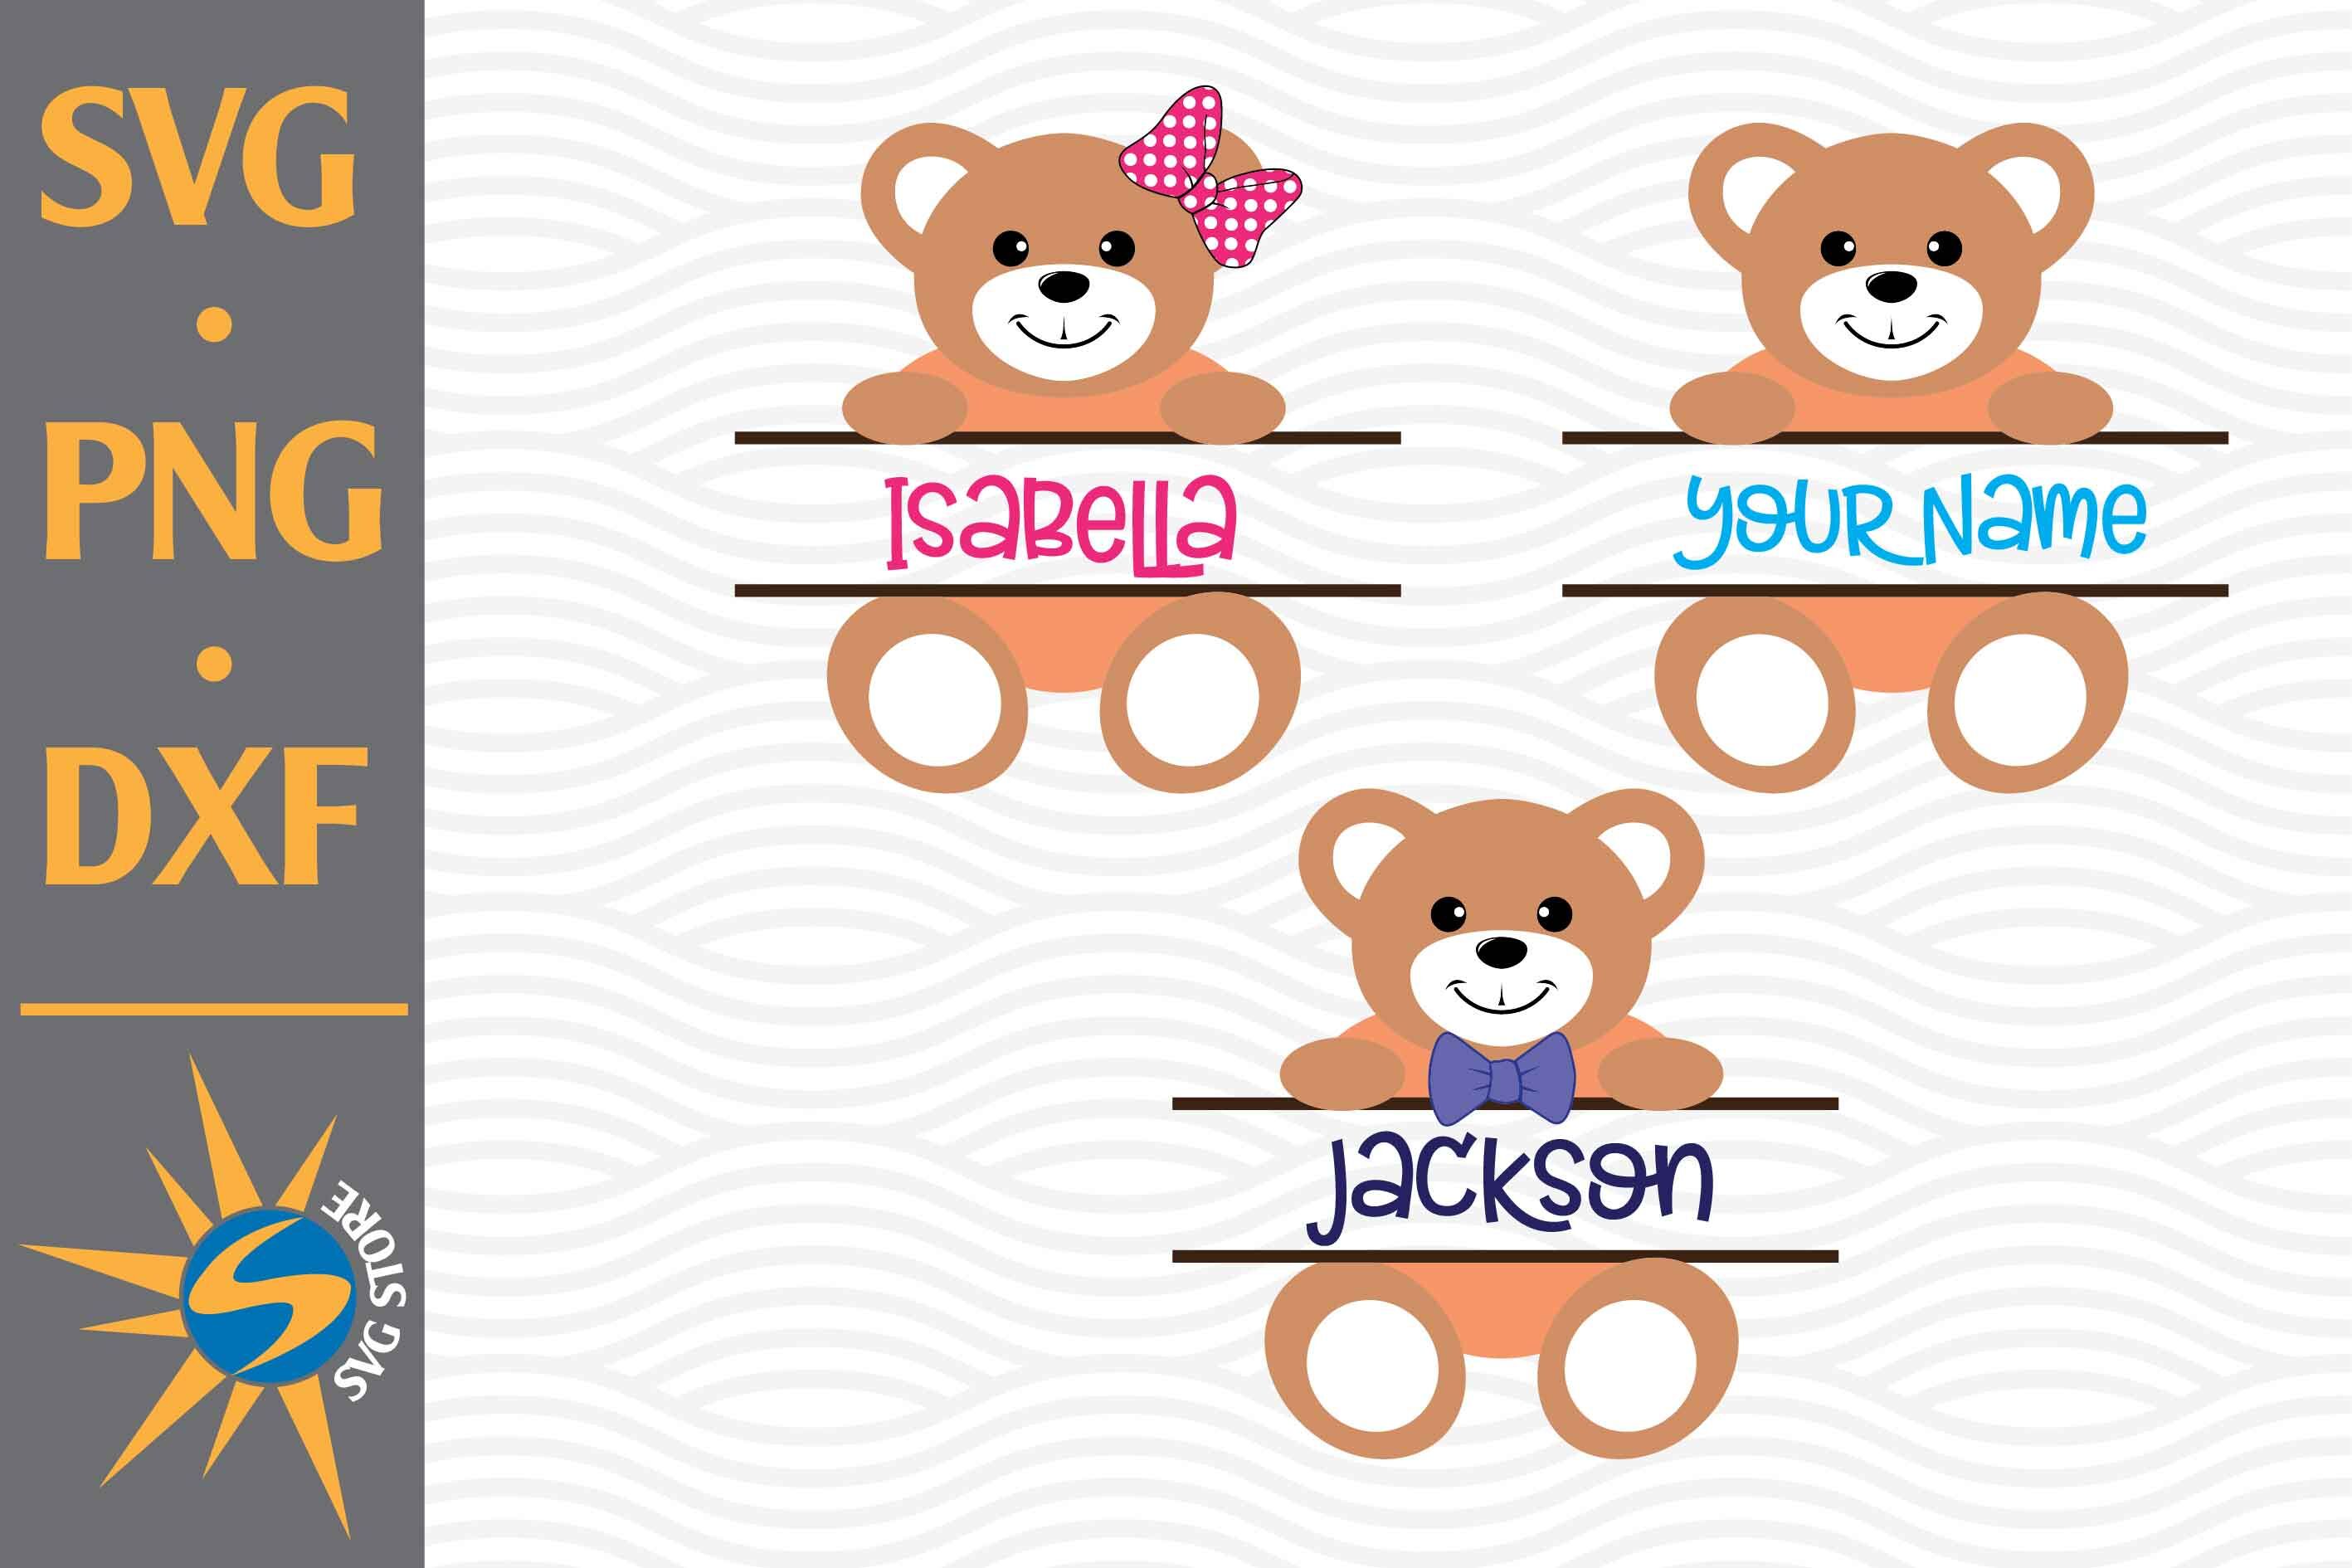 Download Templates Pdf And Png Cutting File Teddy Bear Svg Eps Teddy Bear Invitation Svg Teddy Bear Invitation Template Dxf Teddy Bear Silhouette Paper Party Supplies